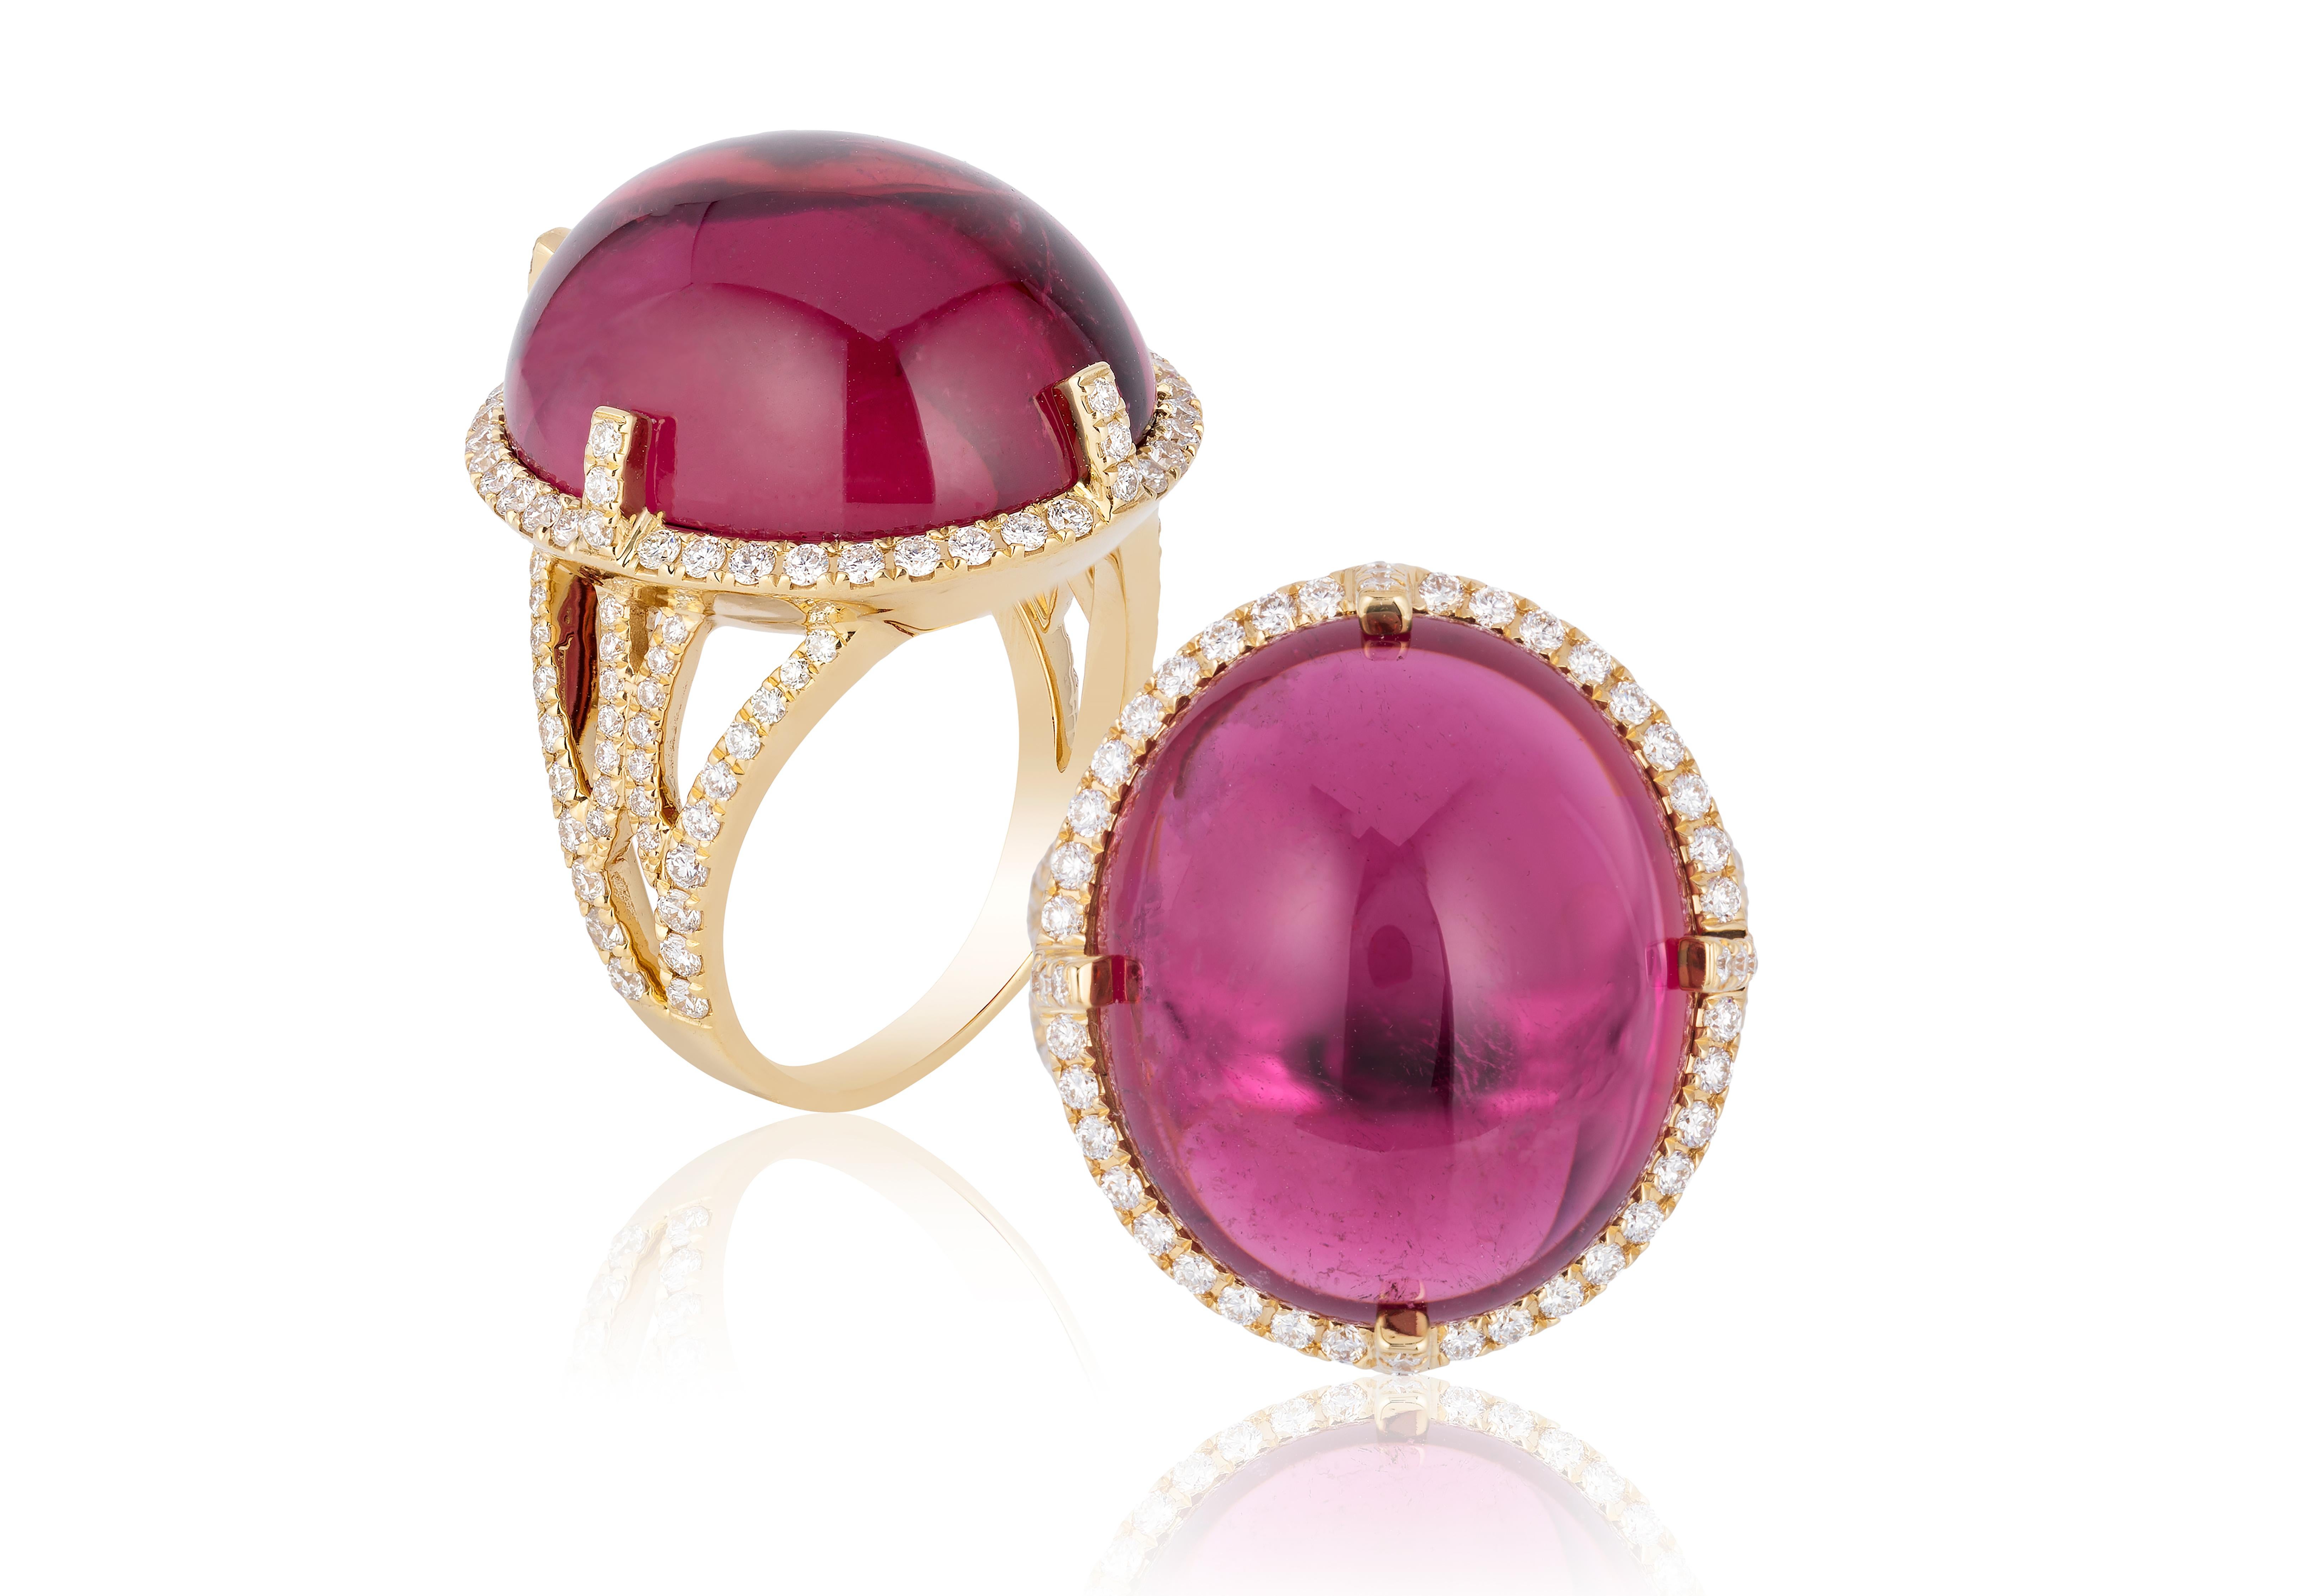 This Oval Rubelite Cabochon Ring is a striking piece from the 'G-One' Collection. Made of 18K yellow gold, it features a mesmerizing oval rubelite cabochon at its center with diamonds around. Also There's diamonds in the band, adding subtle elegance